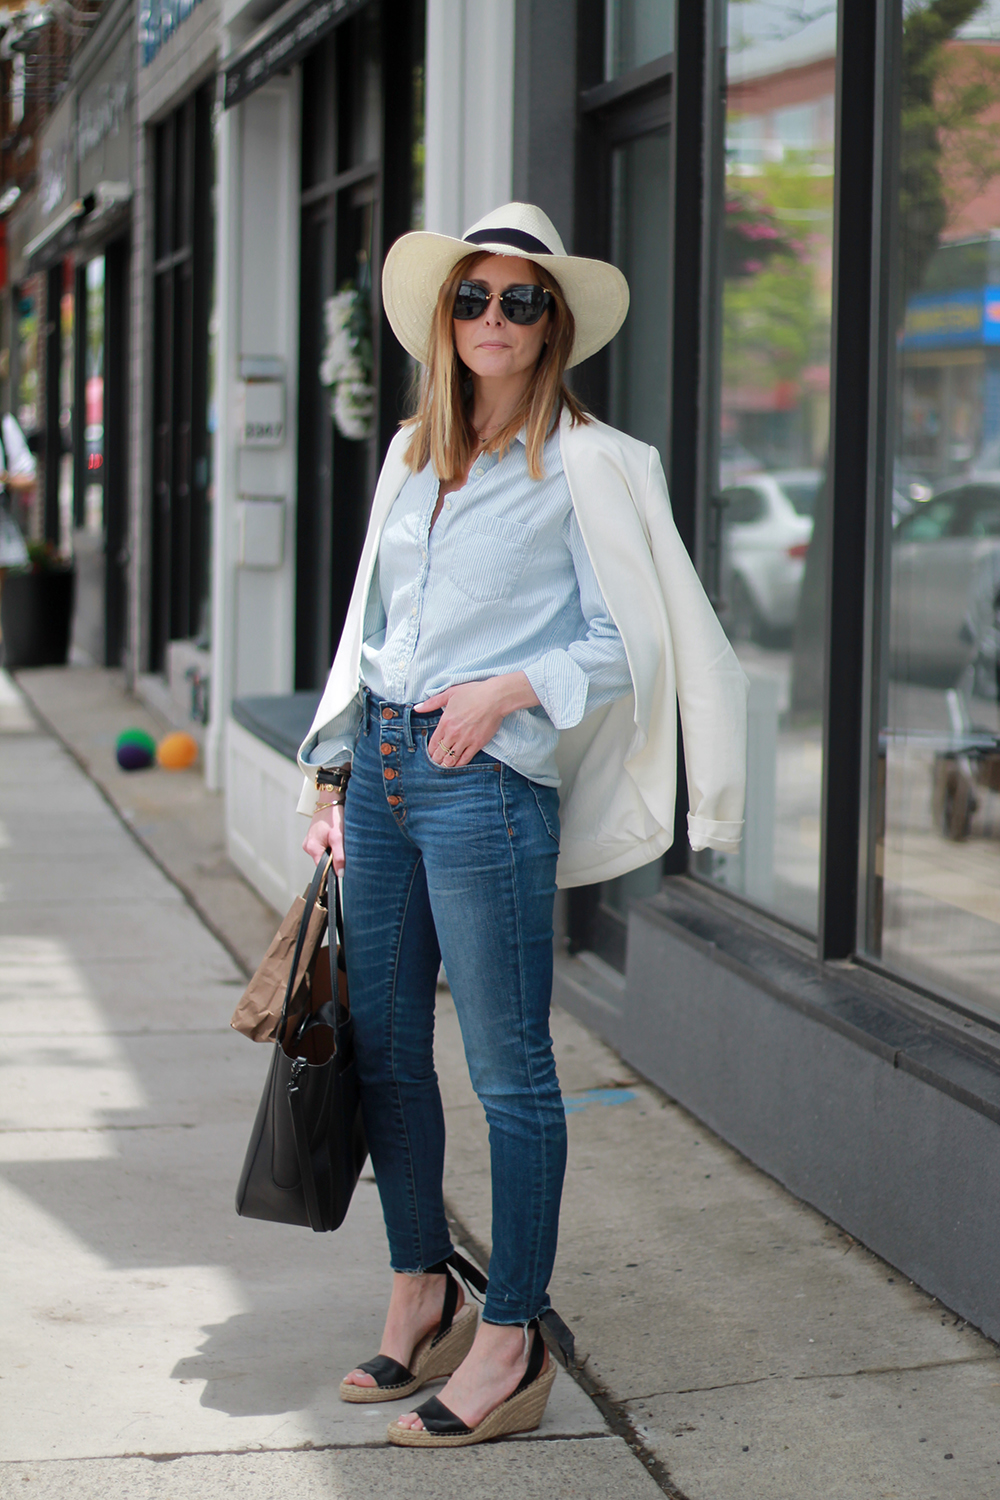 Outfits File: Denim on Denim for a Shopping Stroll - gaby burger